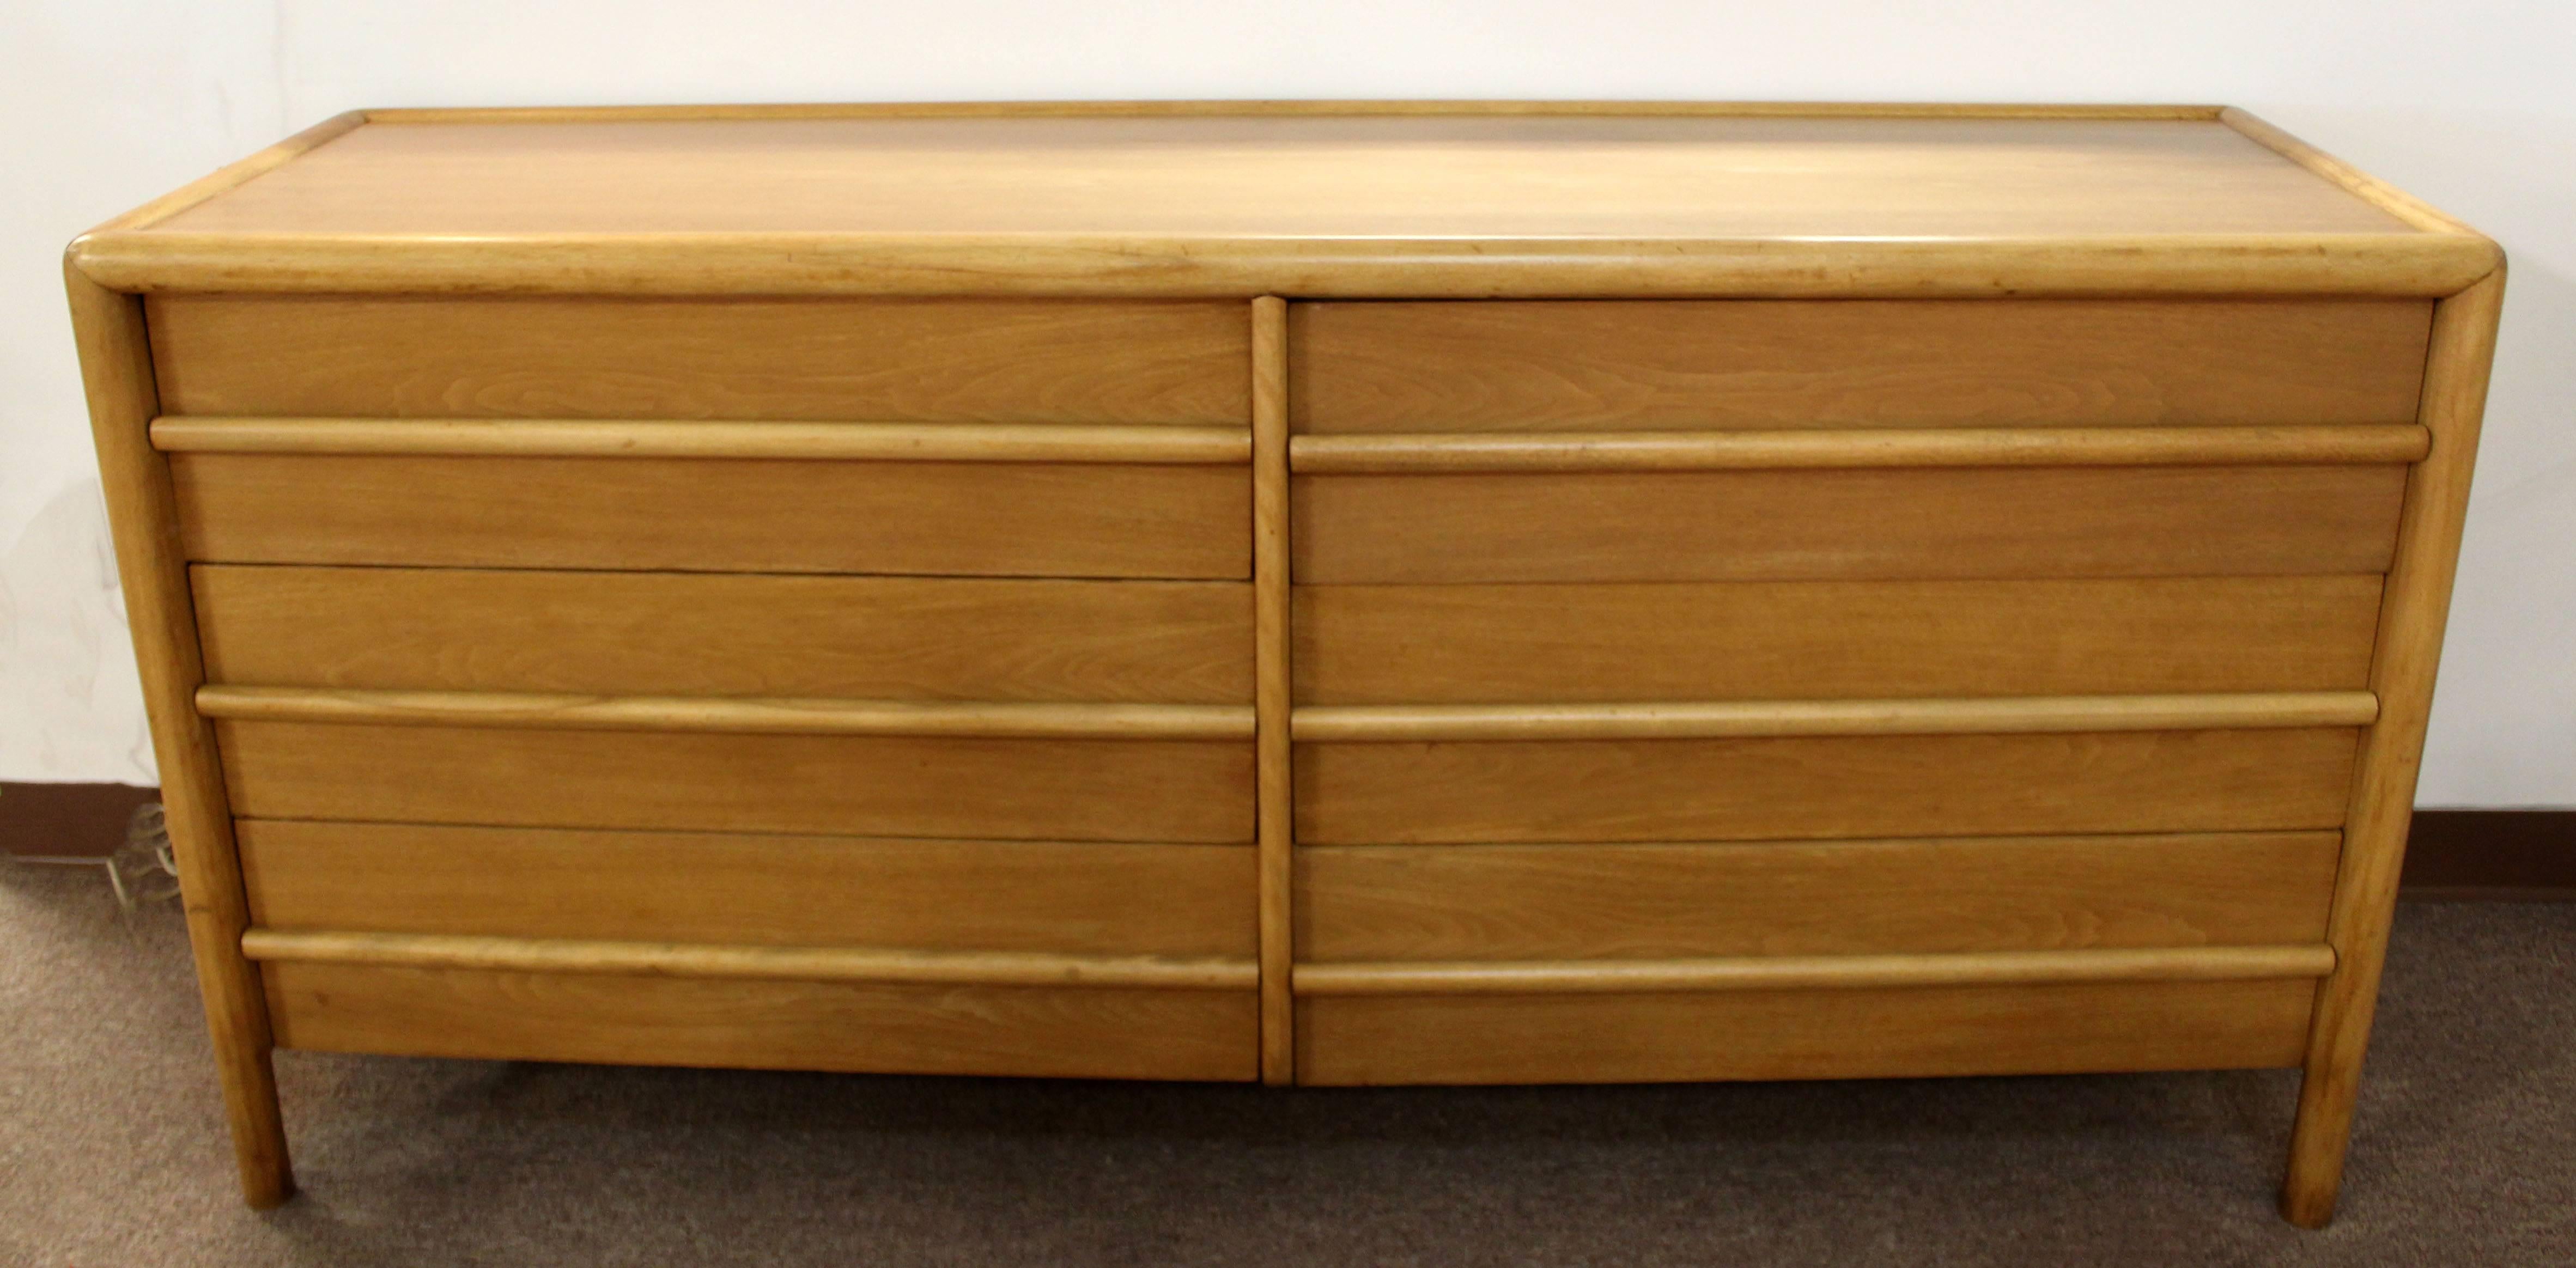 For your consideration is a rare, six-drawer with dividers honey walnut credenza by Robsjohn-Gibbings for Widdicomb, circa 1950s. Retains original label. In excellent condition. The dimensions are 69